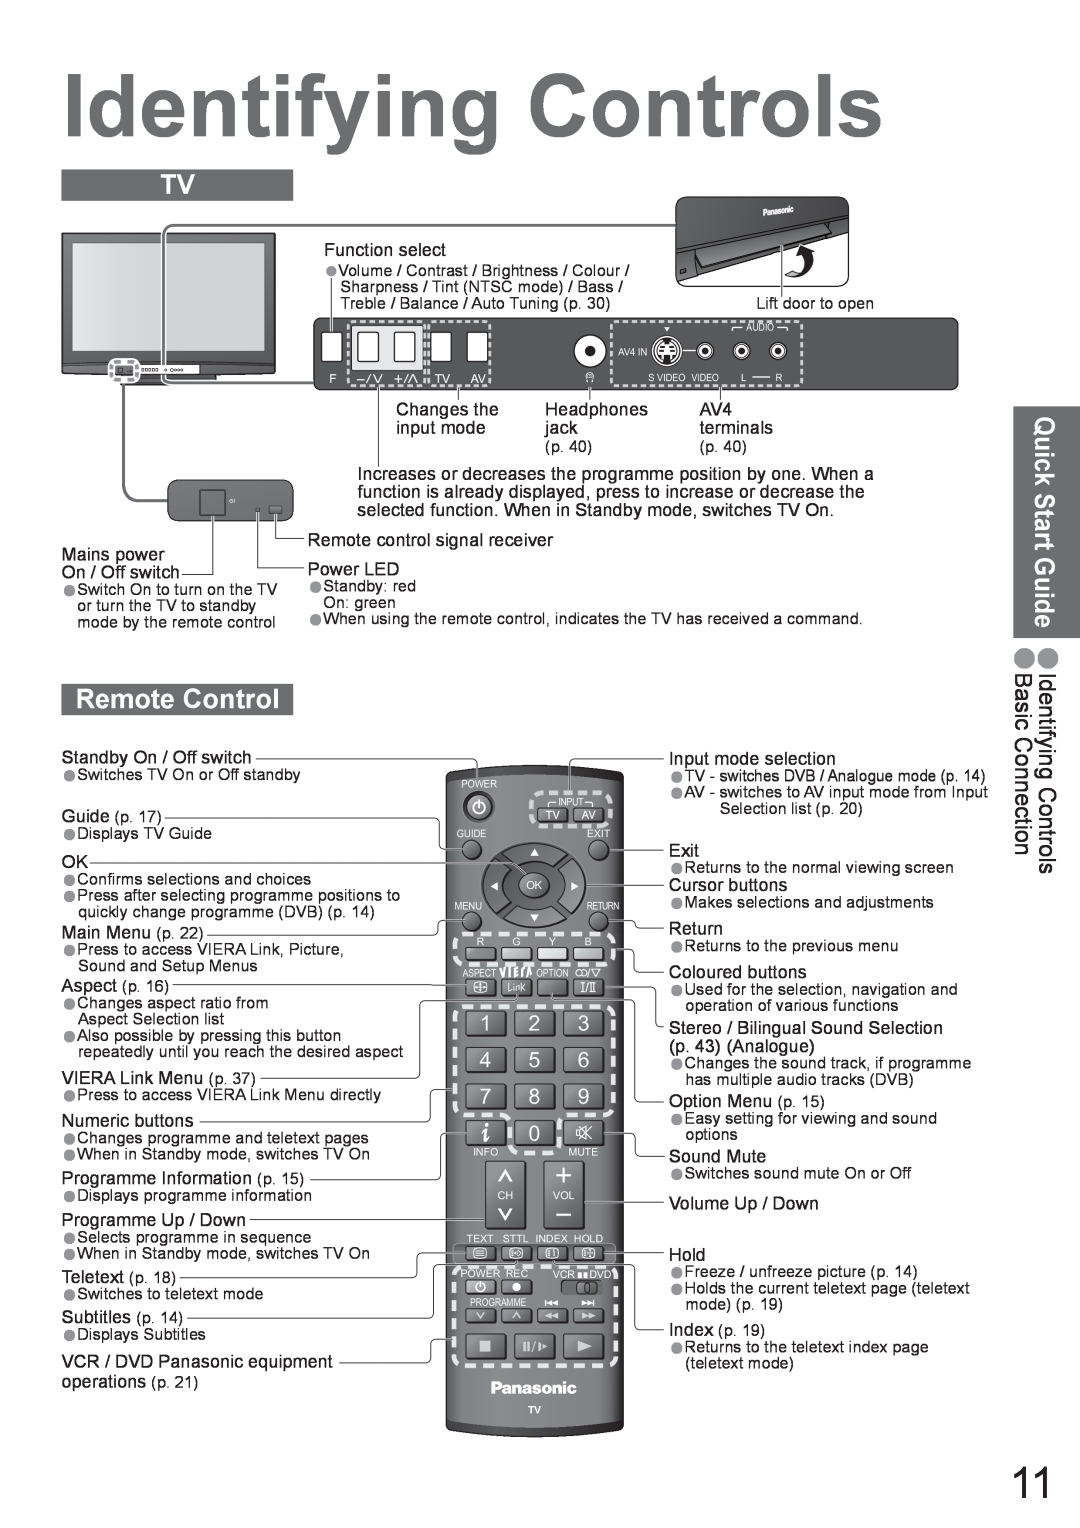 Panasonic TH-42PX8A manual Remote Control, Identifying Controls Basic Connection, Quick Start Guide 